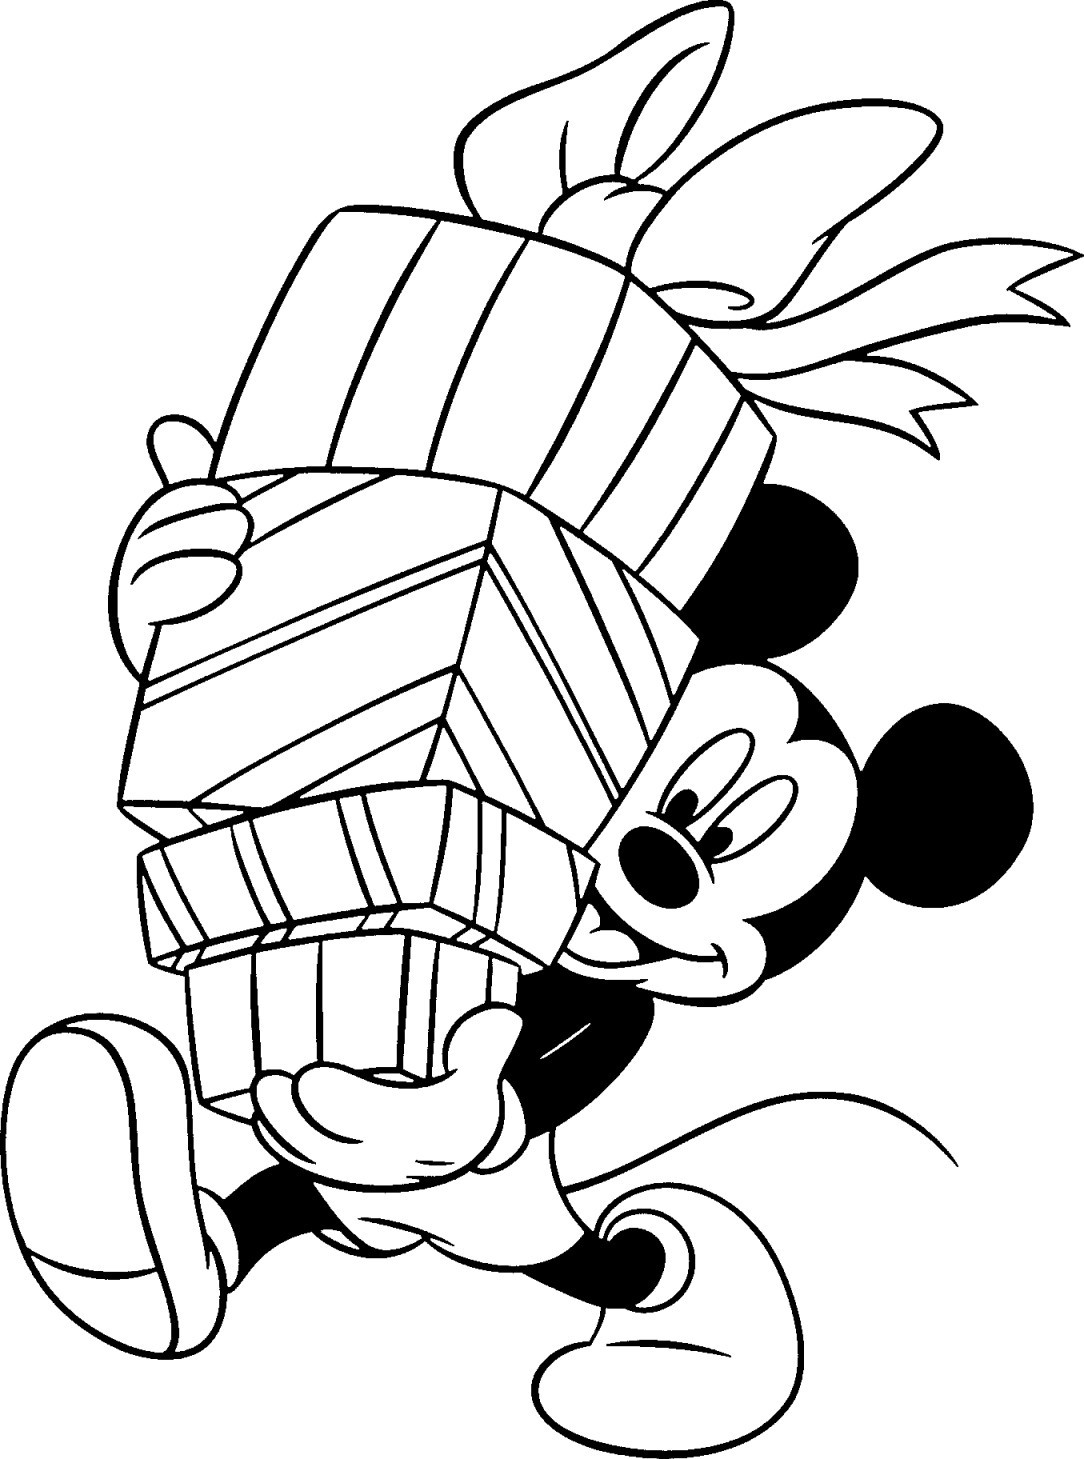 Christmas Coloring Sheets For Kids
 Free Disney Christmas Printable Coloring Pages for Kids